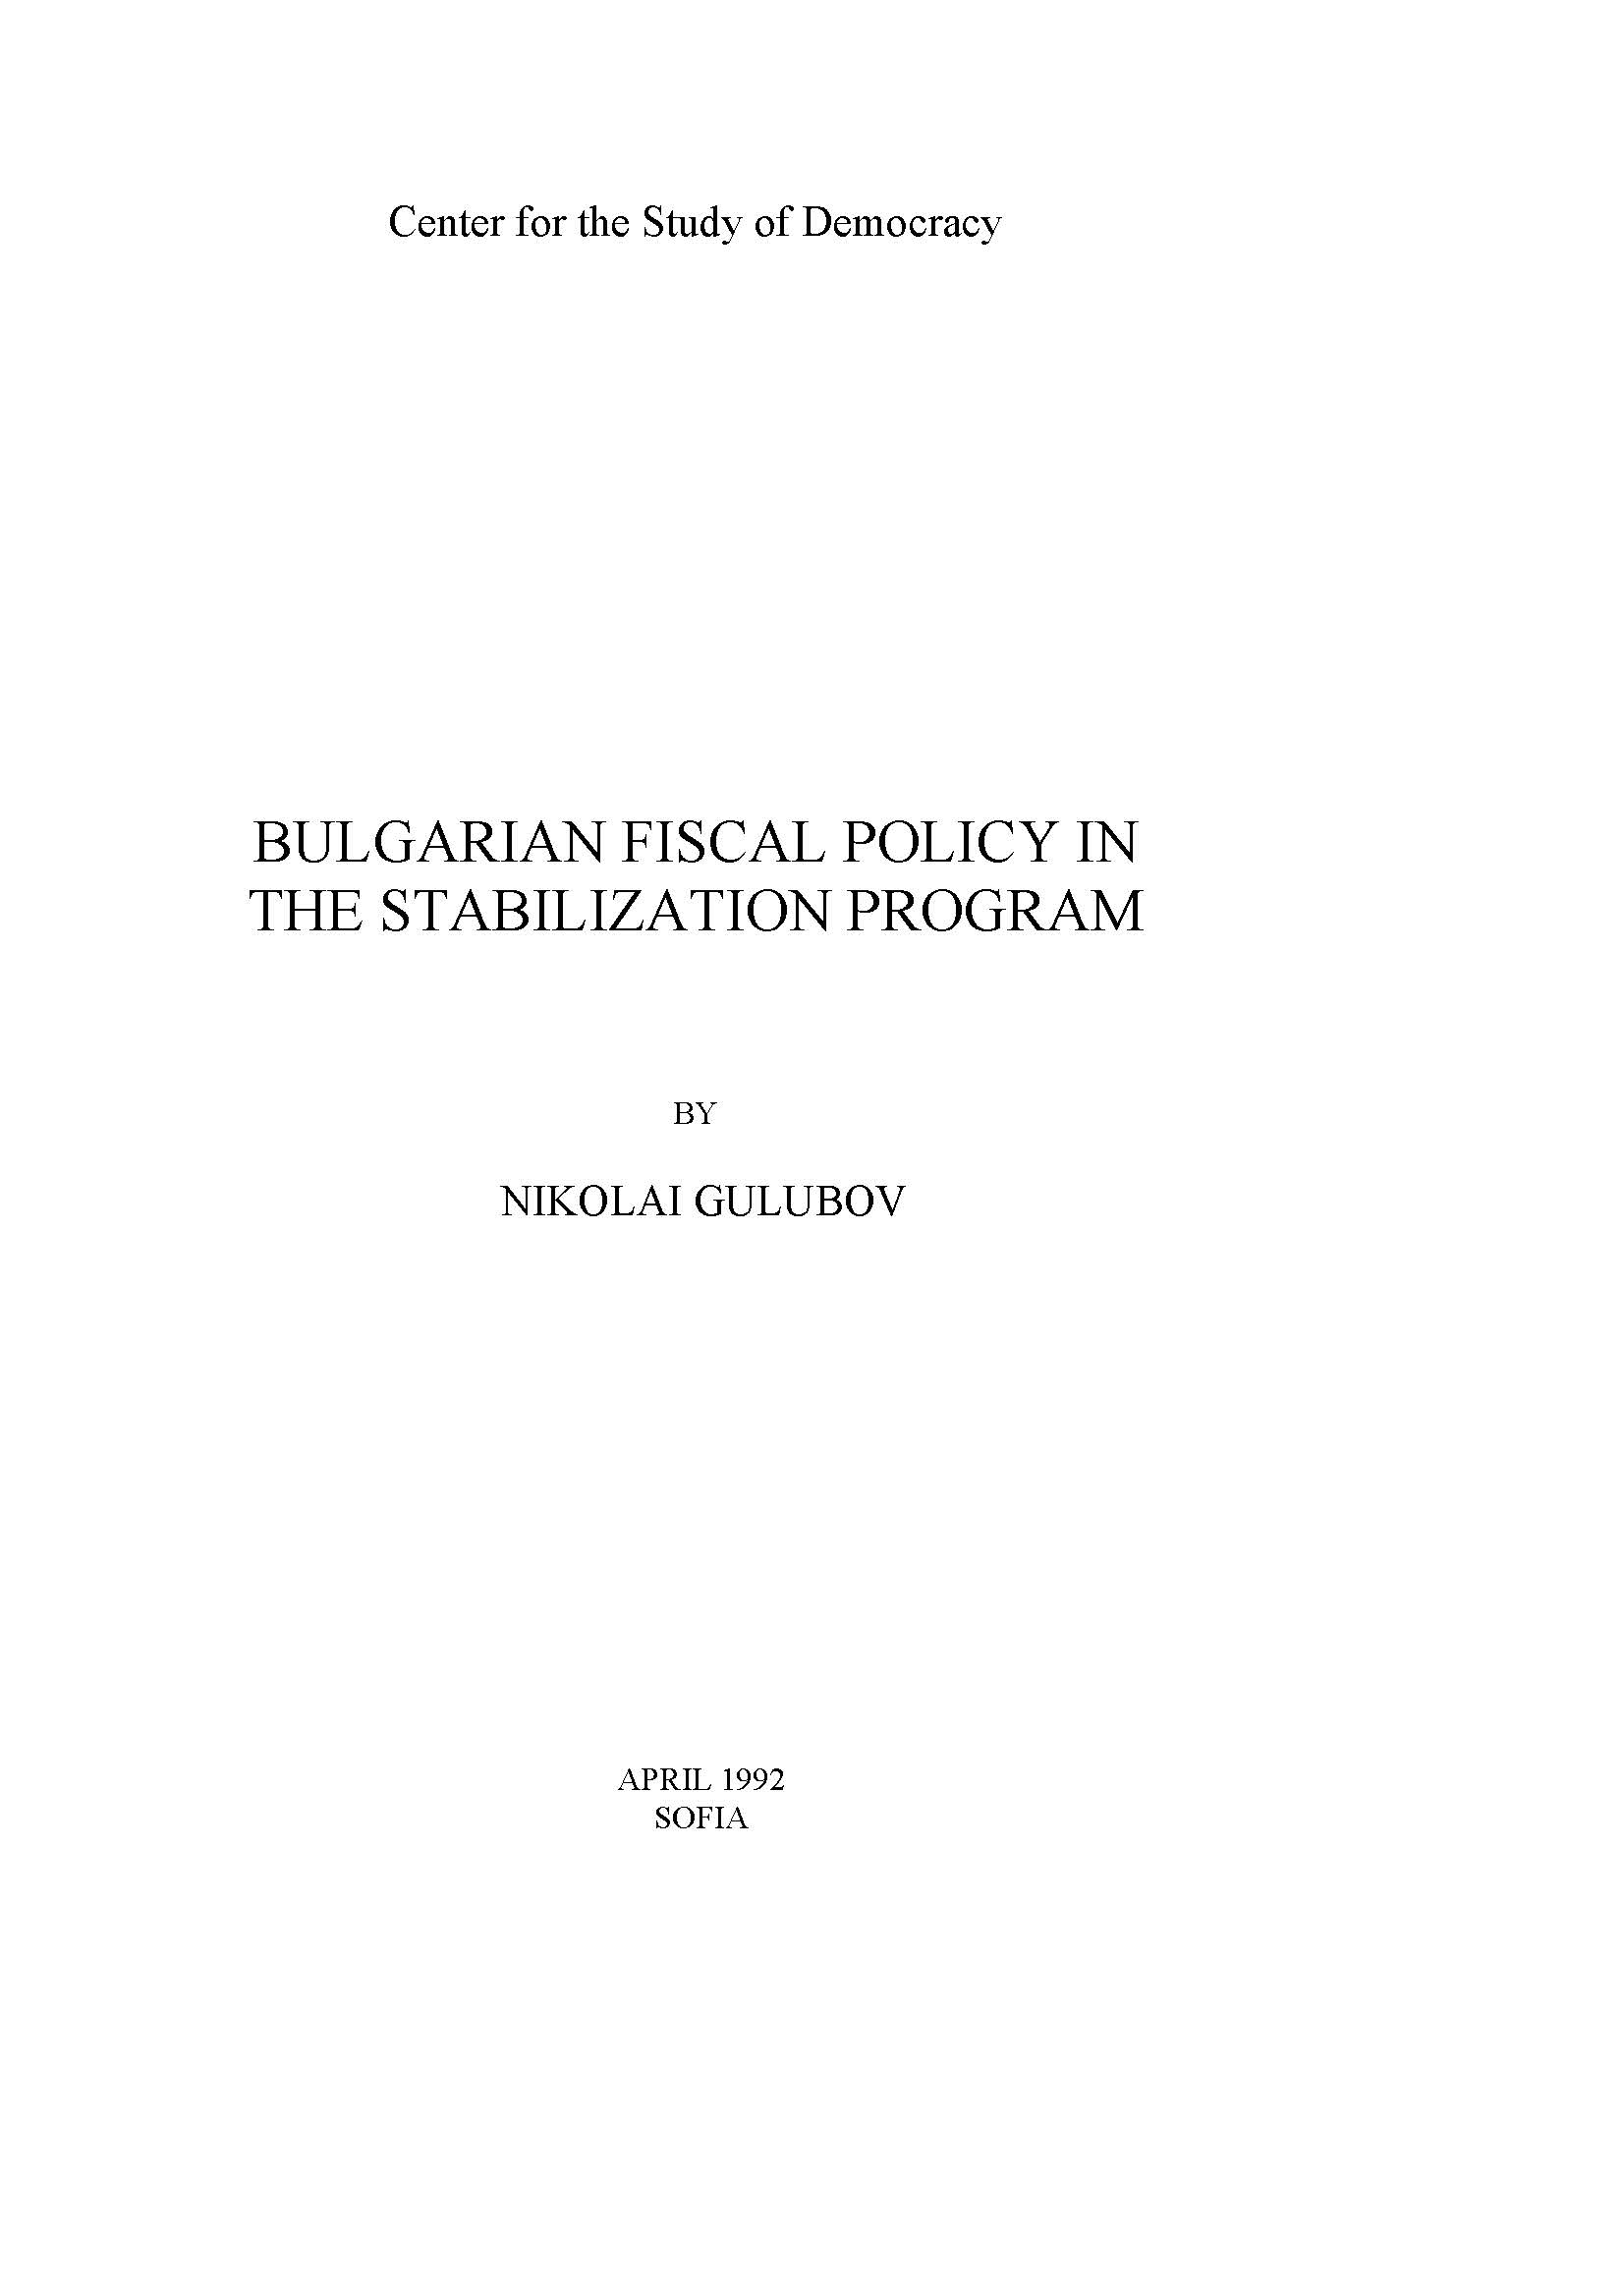 Bulgarian Fiscal Policy in the Stabilization Program